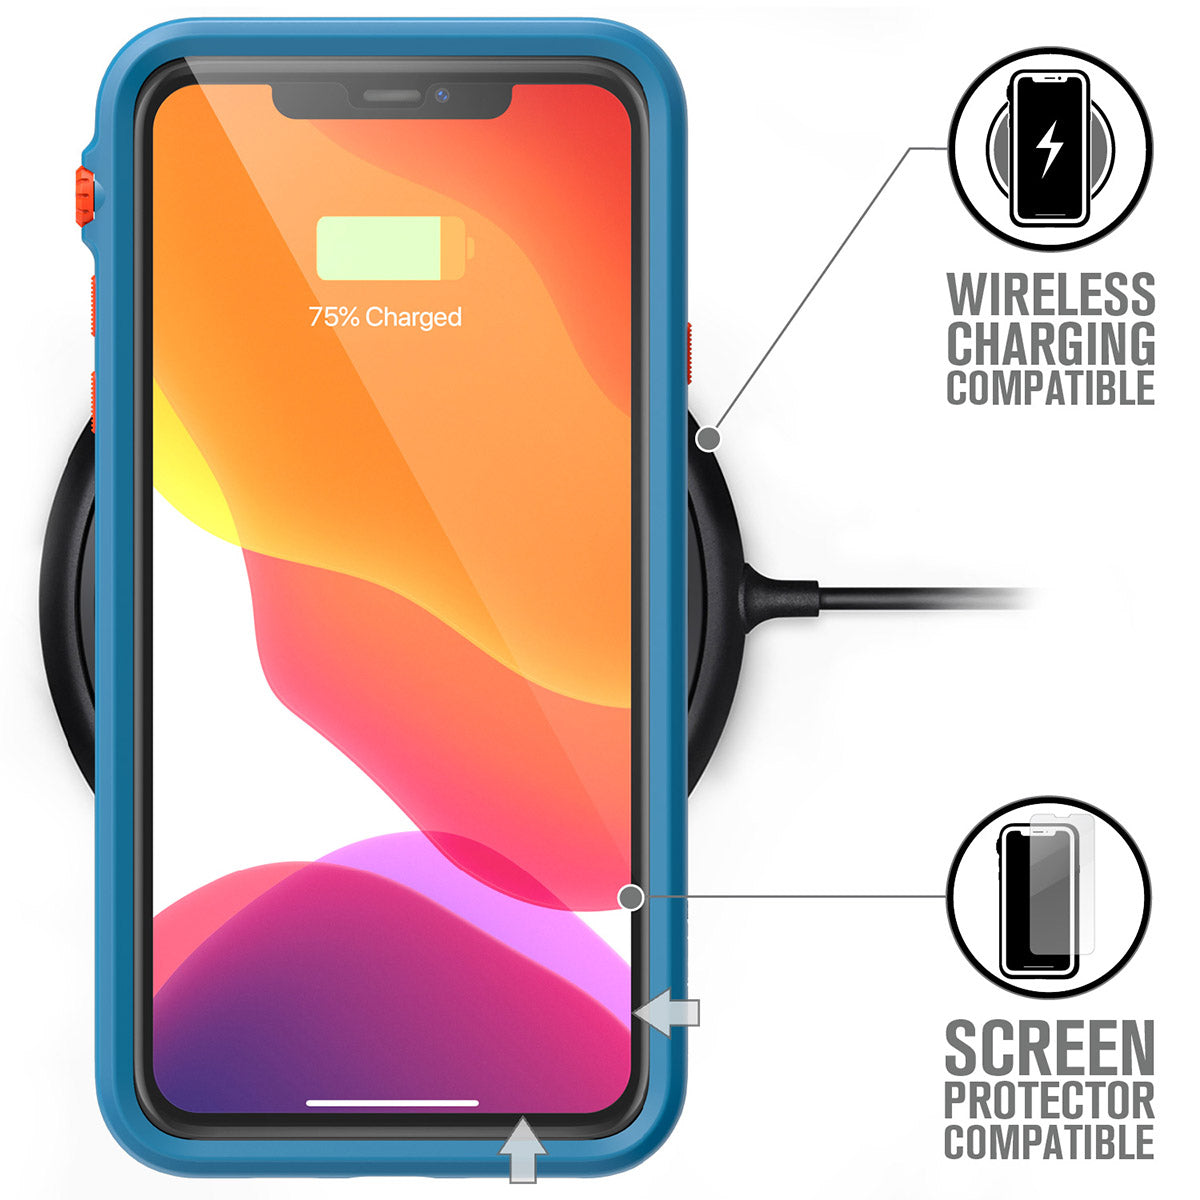 catalyst iPhone 11 series impact protection case for iphone 11 pro max bluerdige sunset placed on the wireless charger 75% charged text reads wireless charging compatible screen protector compatible